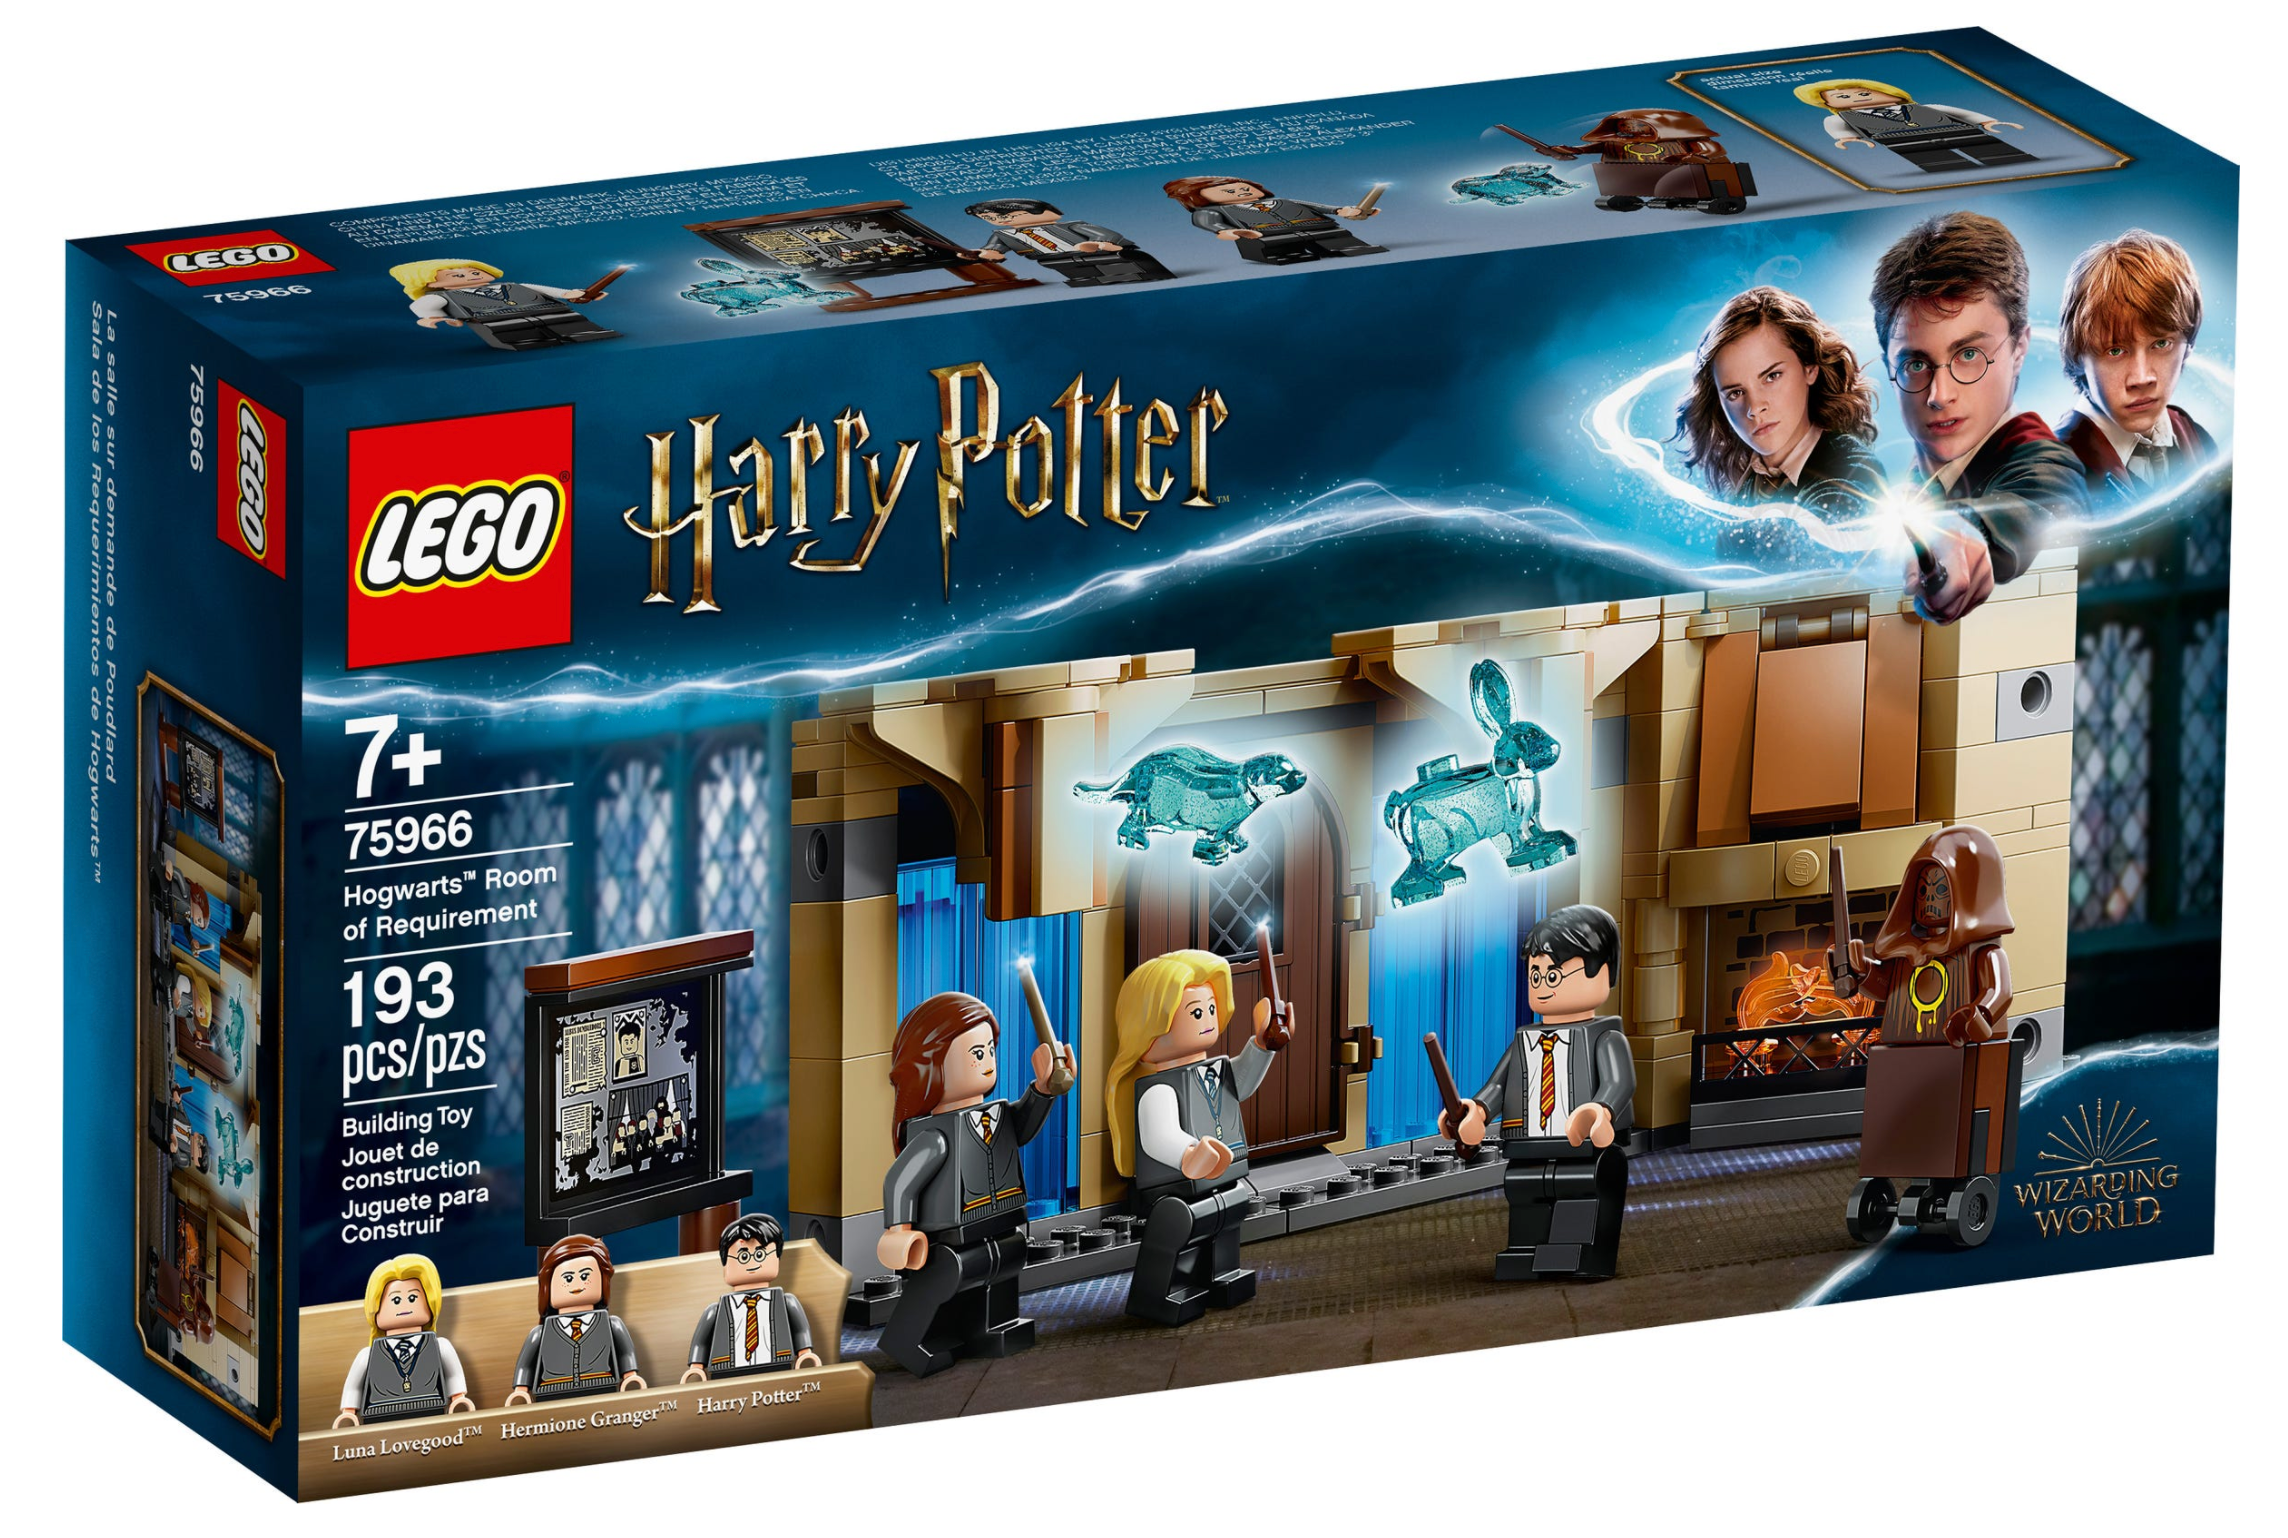 LEGO: Harry Potter - Hogwarts™ Room of Requirement